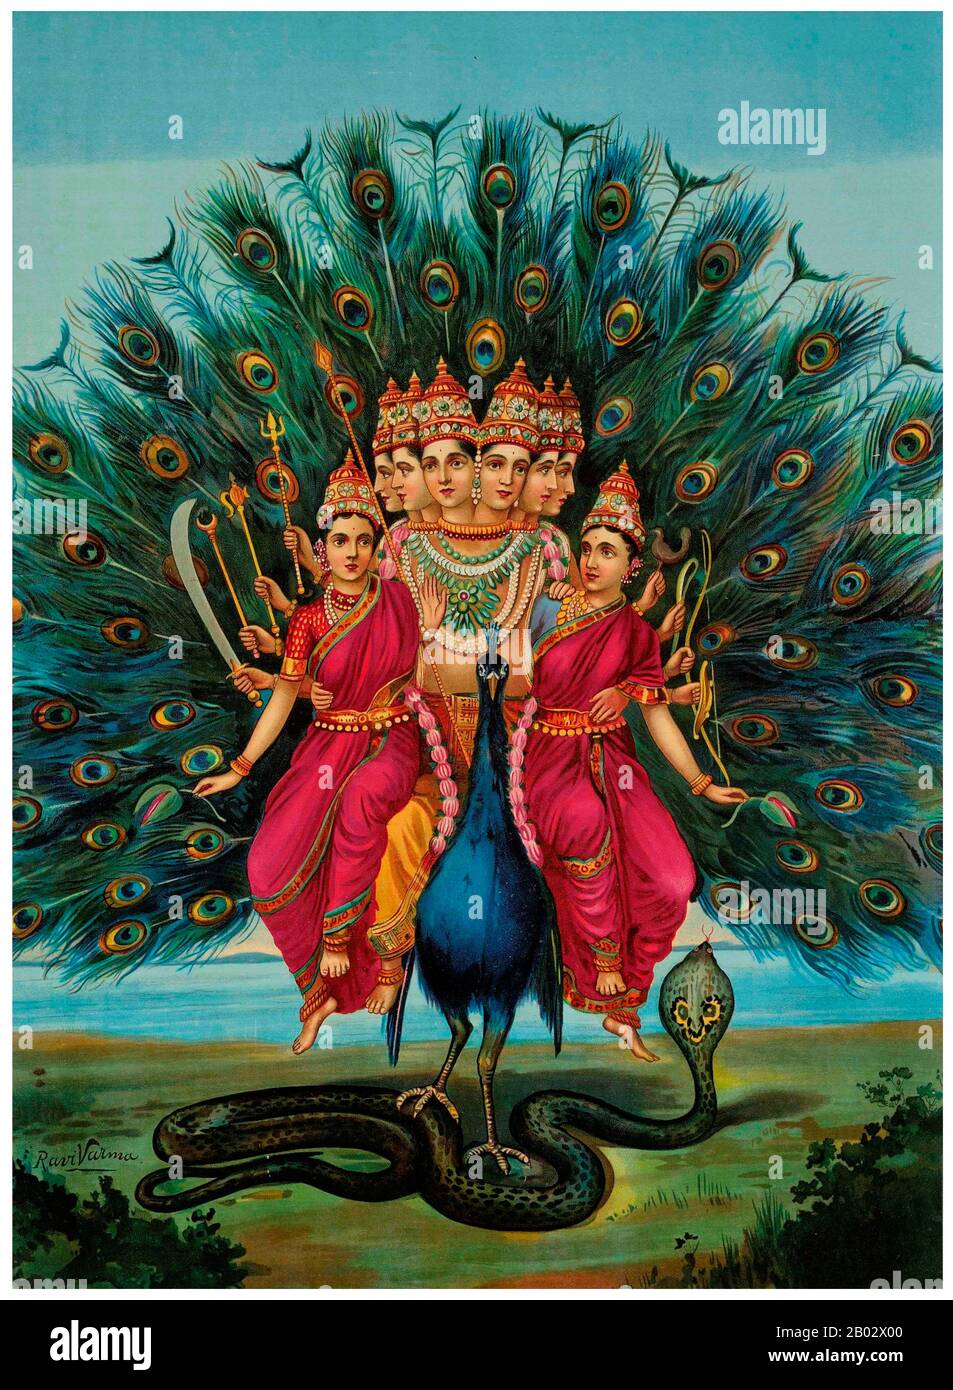 Kartikeya, also known as Skanda, Kumaran, Kumara Swami and Subramaniyan, is the Hindu god of war. He is the commander-in-chief of the army of the devas (gods) and the son of Shiva and Parvati.  Murugan is often referred to as 'Tamil Kadavul' (meaning 'God of Tamils') and is worshiped primarily in areas with Tamil influences, especially South India, Sri Lanka, Mauritius, Indonesia, Malaysia, Singapore and Reunion Island. His six most important shrines in India are the Arupadaiveedu temples, located in Tamil Nadu. In Sri Lanka, the sacred historical Nallur Kandaswamy temple in Jaffna and Katarag Stock Photo